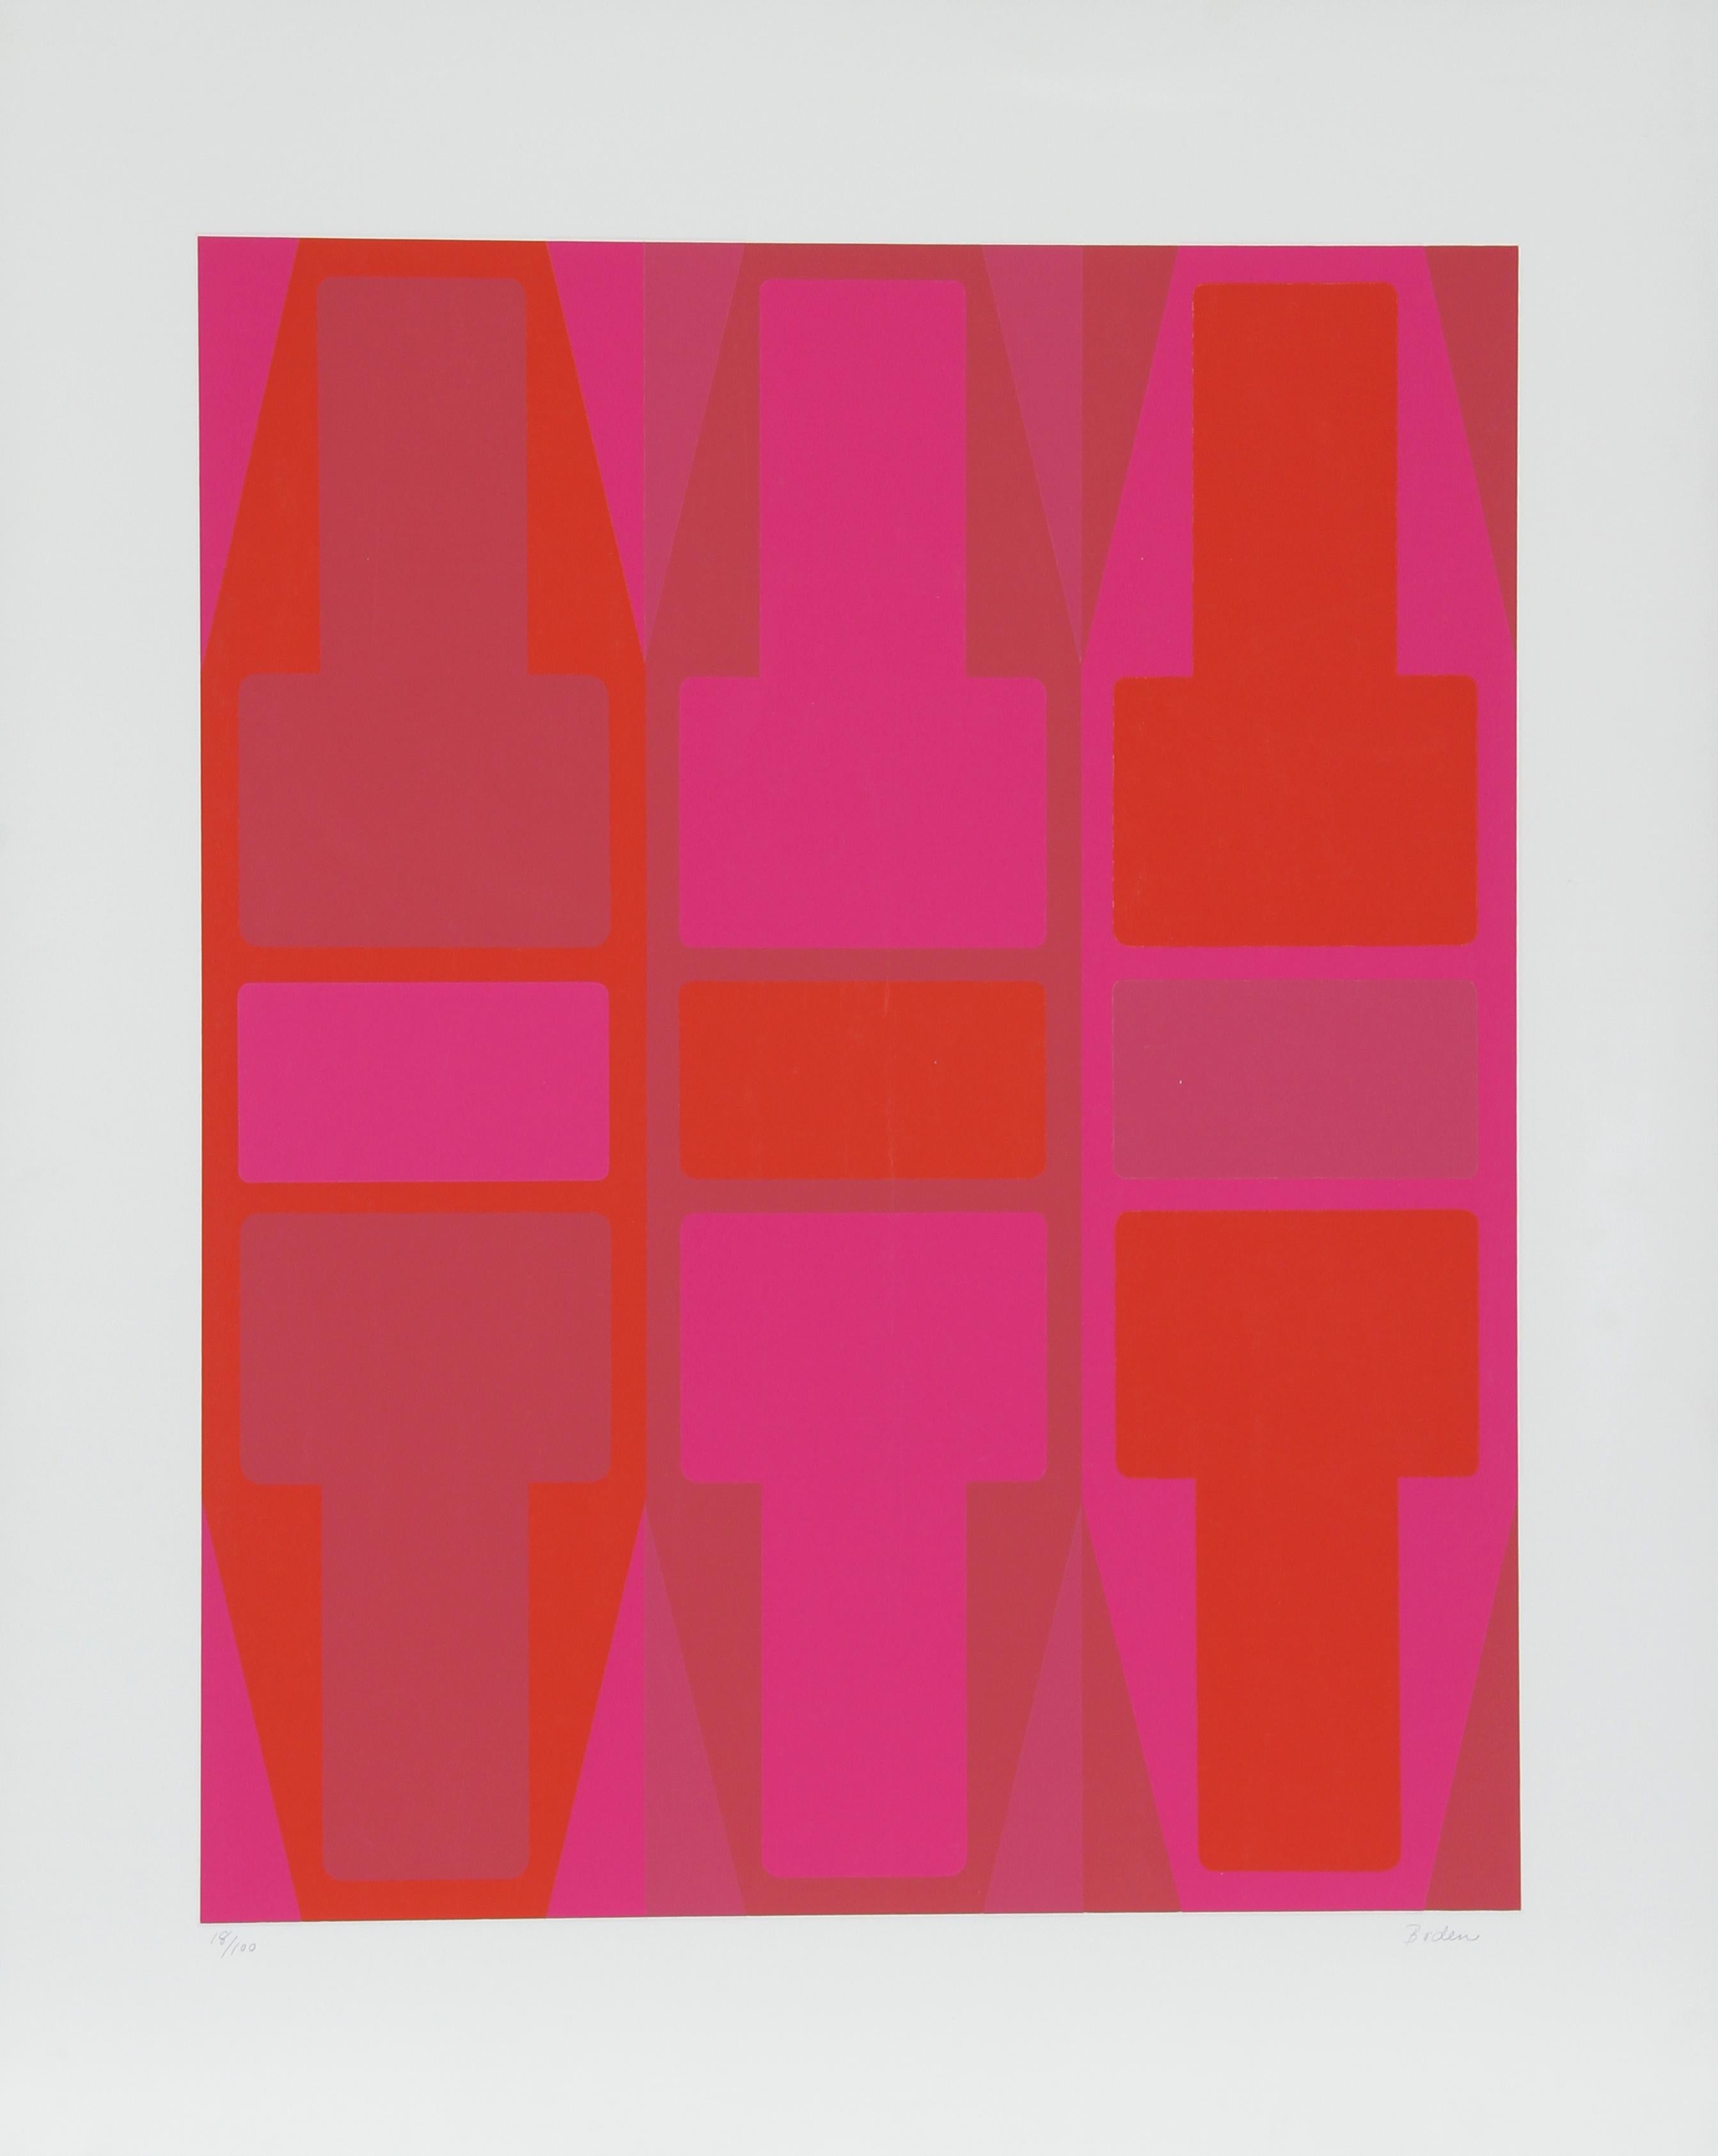 Artist: Arthur Boden, American
Title: T Series (Red)
Year:  circa 1970
Medium:  Serigraph, signed and numbered in pencil
Edition:  100
Size:  29 in. x 23 in. (73.66 cm x 58.42 cm) 